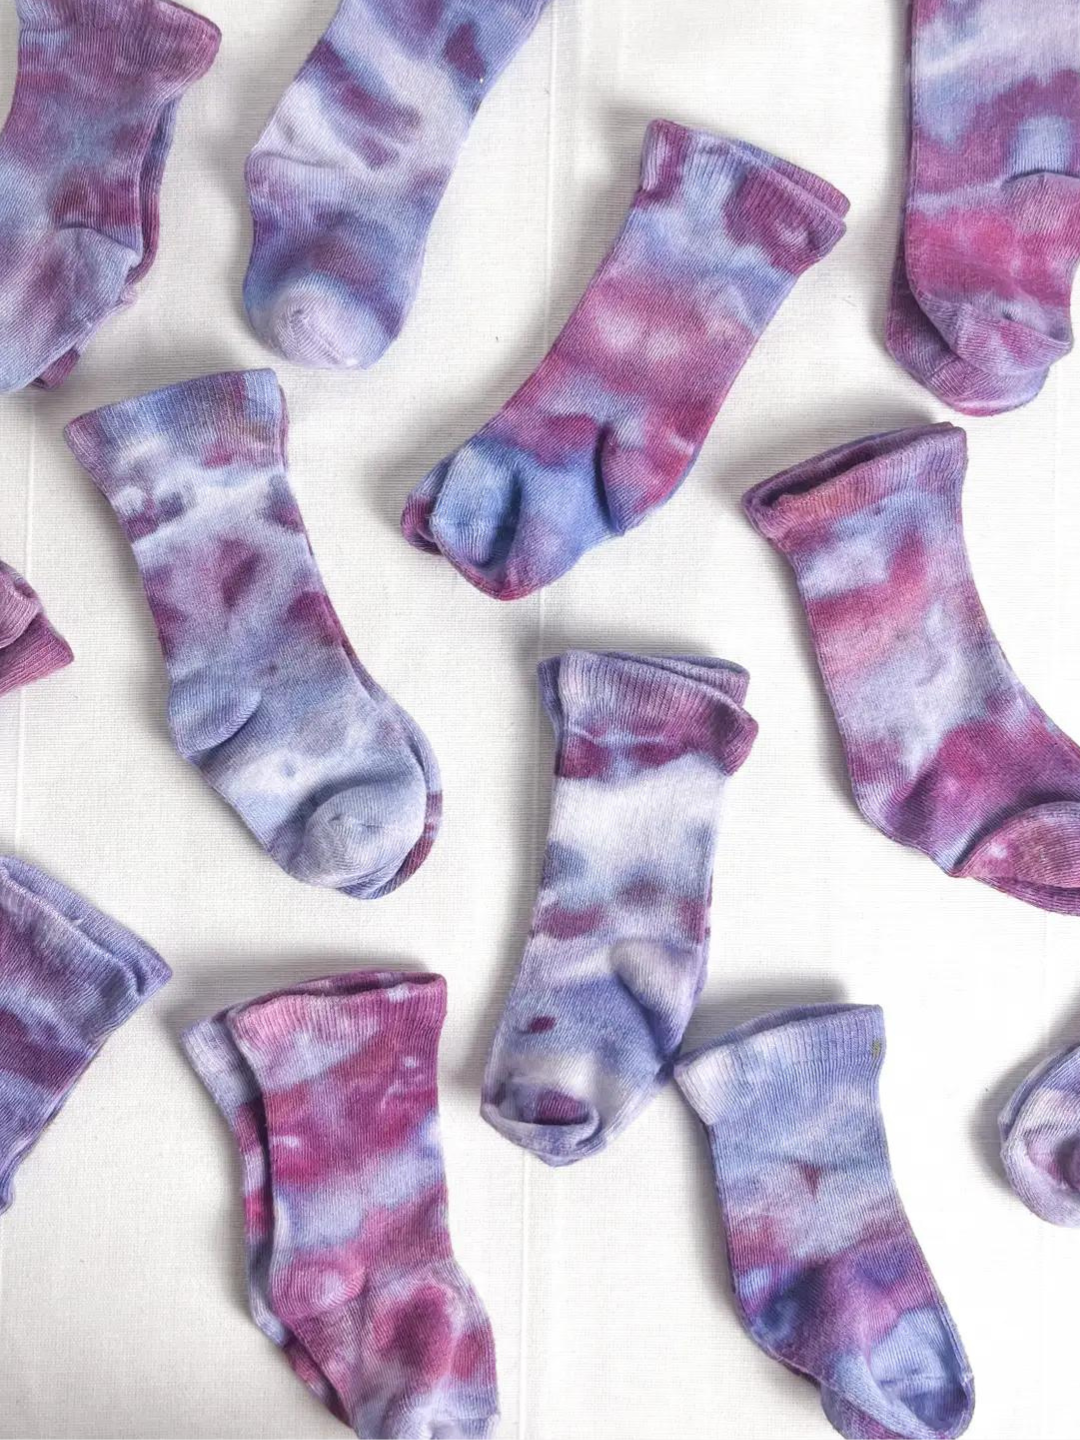 Multiple pairs of baby ankle socks in dappled shades of violet, pink and blue